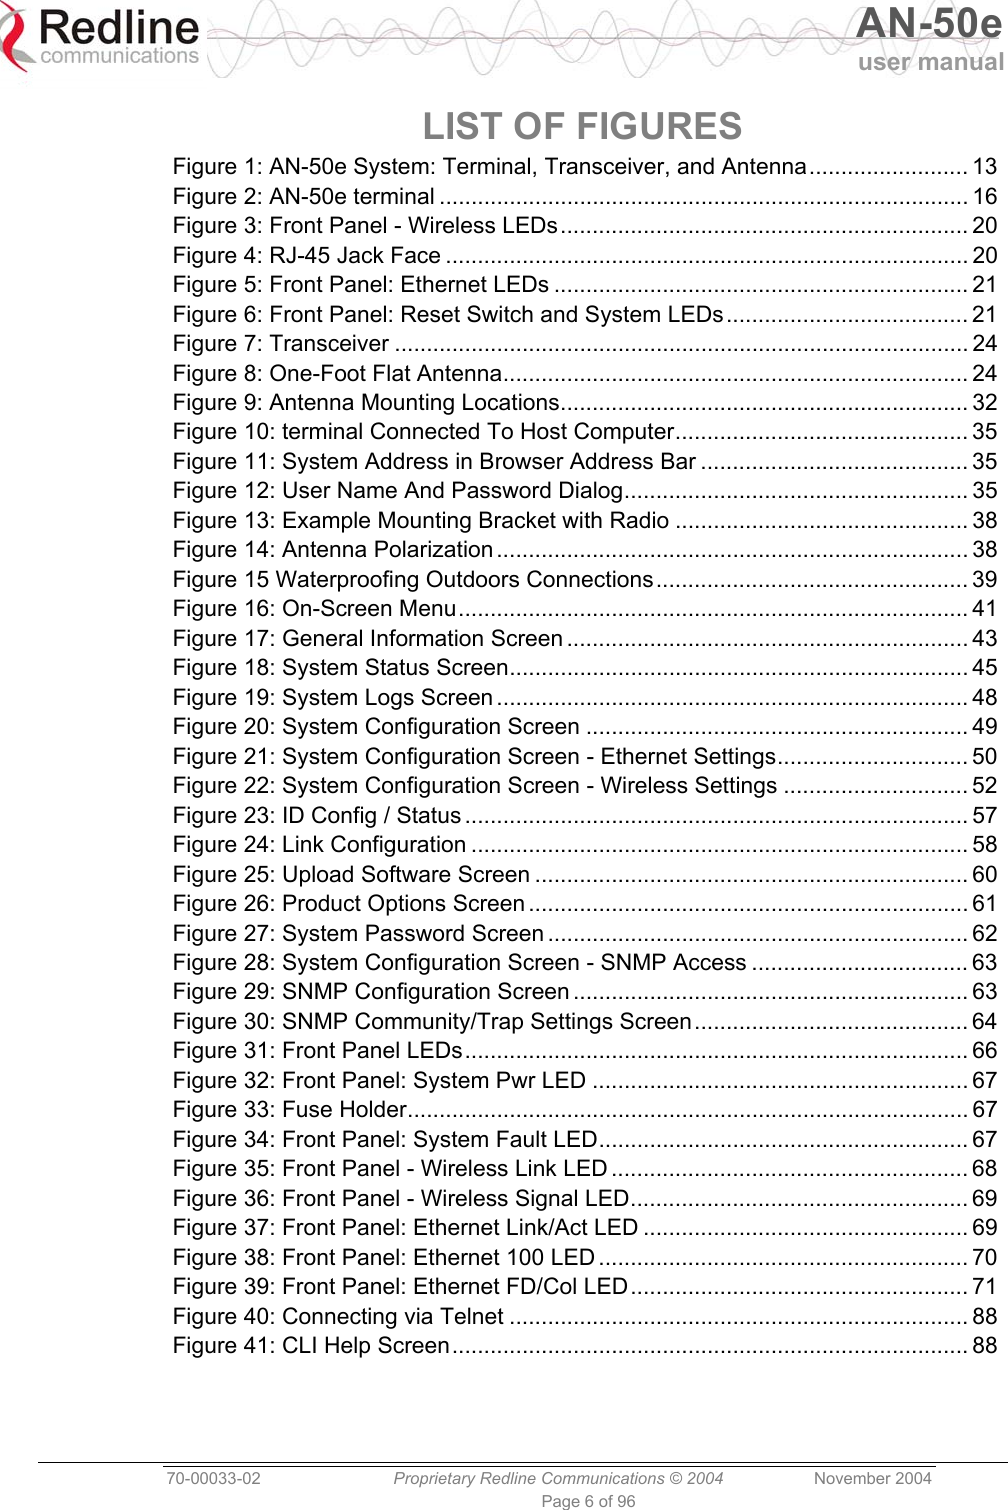   AN-50e user manual  70-00033-02  Proprietary Redline Communications © 2004 November 2004 Page 6 of 96 LIST OF FIGURES Figure 1: AN-50e System: Terminal, Transceiver, and Antenna......................... 13 Figure 2: AN-50e terminal ................................................................................... 16 Figure 3: Front Panel - Wireless LEDs................................................................ 20 Figure 4: RJ-45 Jack Face .................................................................................. 20 Figure 5: Front Panel: Ethernet LEDs ................................................................. 21 Figure 6: Front Panel: Reset Switch and System LEDs...................................... 21 Figure 7: Transceiver .......................................................................................... 24 Figure 8: One-Foot Flat Antenna......................................................................... 24 Figure 9: Antenna Mounting Locations................................................................ 32 Figure 10: terminal Connected To Host Computer.............................................. 35 Figure 11: System Address in Browser Address Bar .......................................... 35 Figure 12: User Name And Password Dialog...................................................... 35 Figure 13: Example Mounting Bracket with Radio .............................................. 38 Figure 14: Antenna Polarization .......................................................................... 38 Figure 15 Waterproofing Outdoors Connections................................................. 39 Figure 16: On-Screen Menu................................................................................ 41 Figure 17: General Information Screen ............................................................... 43 Figure 18: System Status Screen........................................................................ 45 Figure 19: System Logs Screen .......................................................................... 48 Figure 20: System Configuration Screen ............................................................ 49 Figure 21: System Configuration Screen - Ethernet Settings.............................. 50 Figure 22: System Configuration Screen - Wireless Settings ............................. 52 Figure 23: ID Config / Status ............................................................................... 57 Figure 24: Link Configuration .............................................................................. 58 Figure 25: Upload Software Screen .................................................................... 60 Figure 26: Product Options Screen ..................................................................... 61 Figure 27: System Password Screen .................................................................. 62 Figure 28: System Configuration Screen - SNMP Access .................................. 63 Figure 29: SNMP Configuration Screen .............................................................. 63 Figure 30: SNMP Community/Trap Settings Screen........................................... 64 Figure 31: Front Panel LEDs............................................................................... 66 Figure 32: Front Panel: System Pwr LED ........................................................... 67 Figure 33: Fuse Holder........................................................................................ 67 Figure 34: Front Panel: System Fault LED.......................................................... 67 Figure 35: Front Panel - Wireless Link LED ........................................................ 68 Figure 36: Front Panel - Wireless Signal LED..................................................... 69 Figure 37: Front Panel: Ethernet Link/Act LED ................................................... 69 Figure 38: Front Panel: Ethernet 100 LED .......................................................... 70 Figure 39: Front Panel: Ethernet FD/Col LED..................................................... 71 Figure 40: Connecting via Telnet ........................................................................ 88 Figure 41: CLI Help Screen................................................................................. 88   